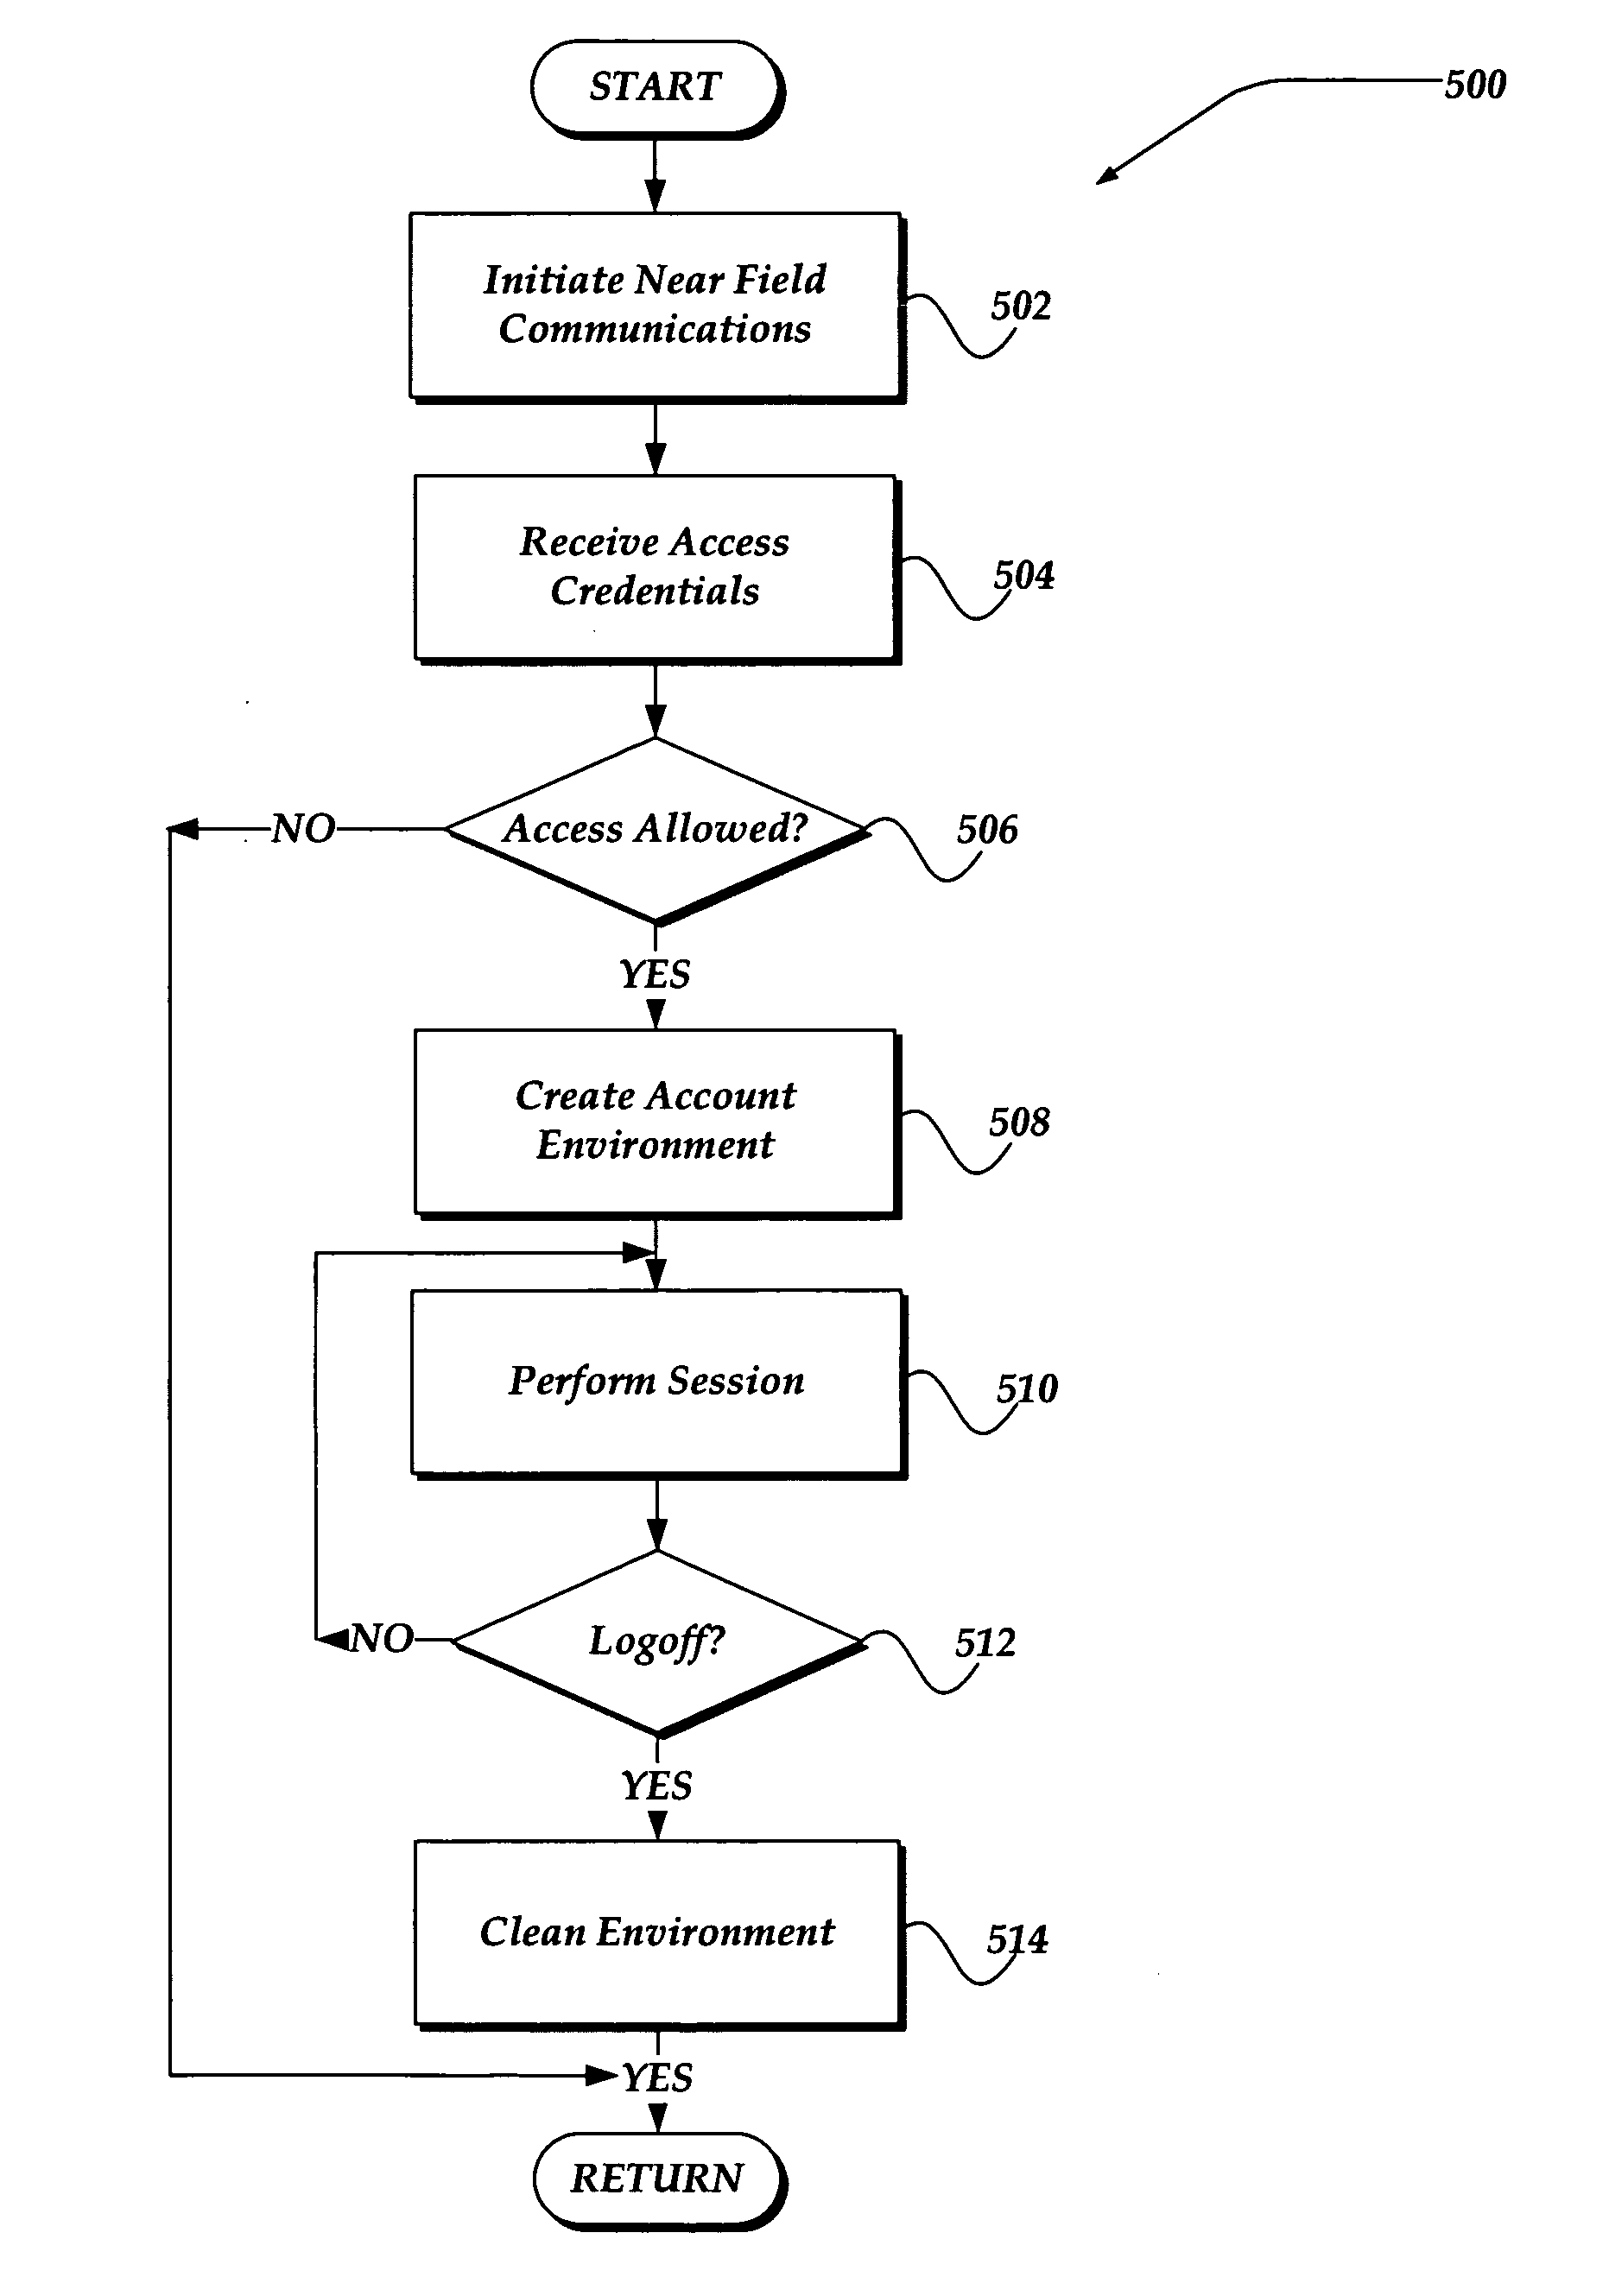 Managing an access account using personal area networks and credentials on a mobile device